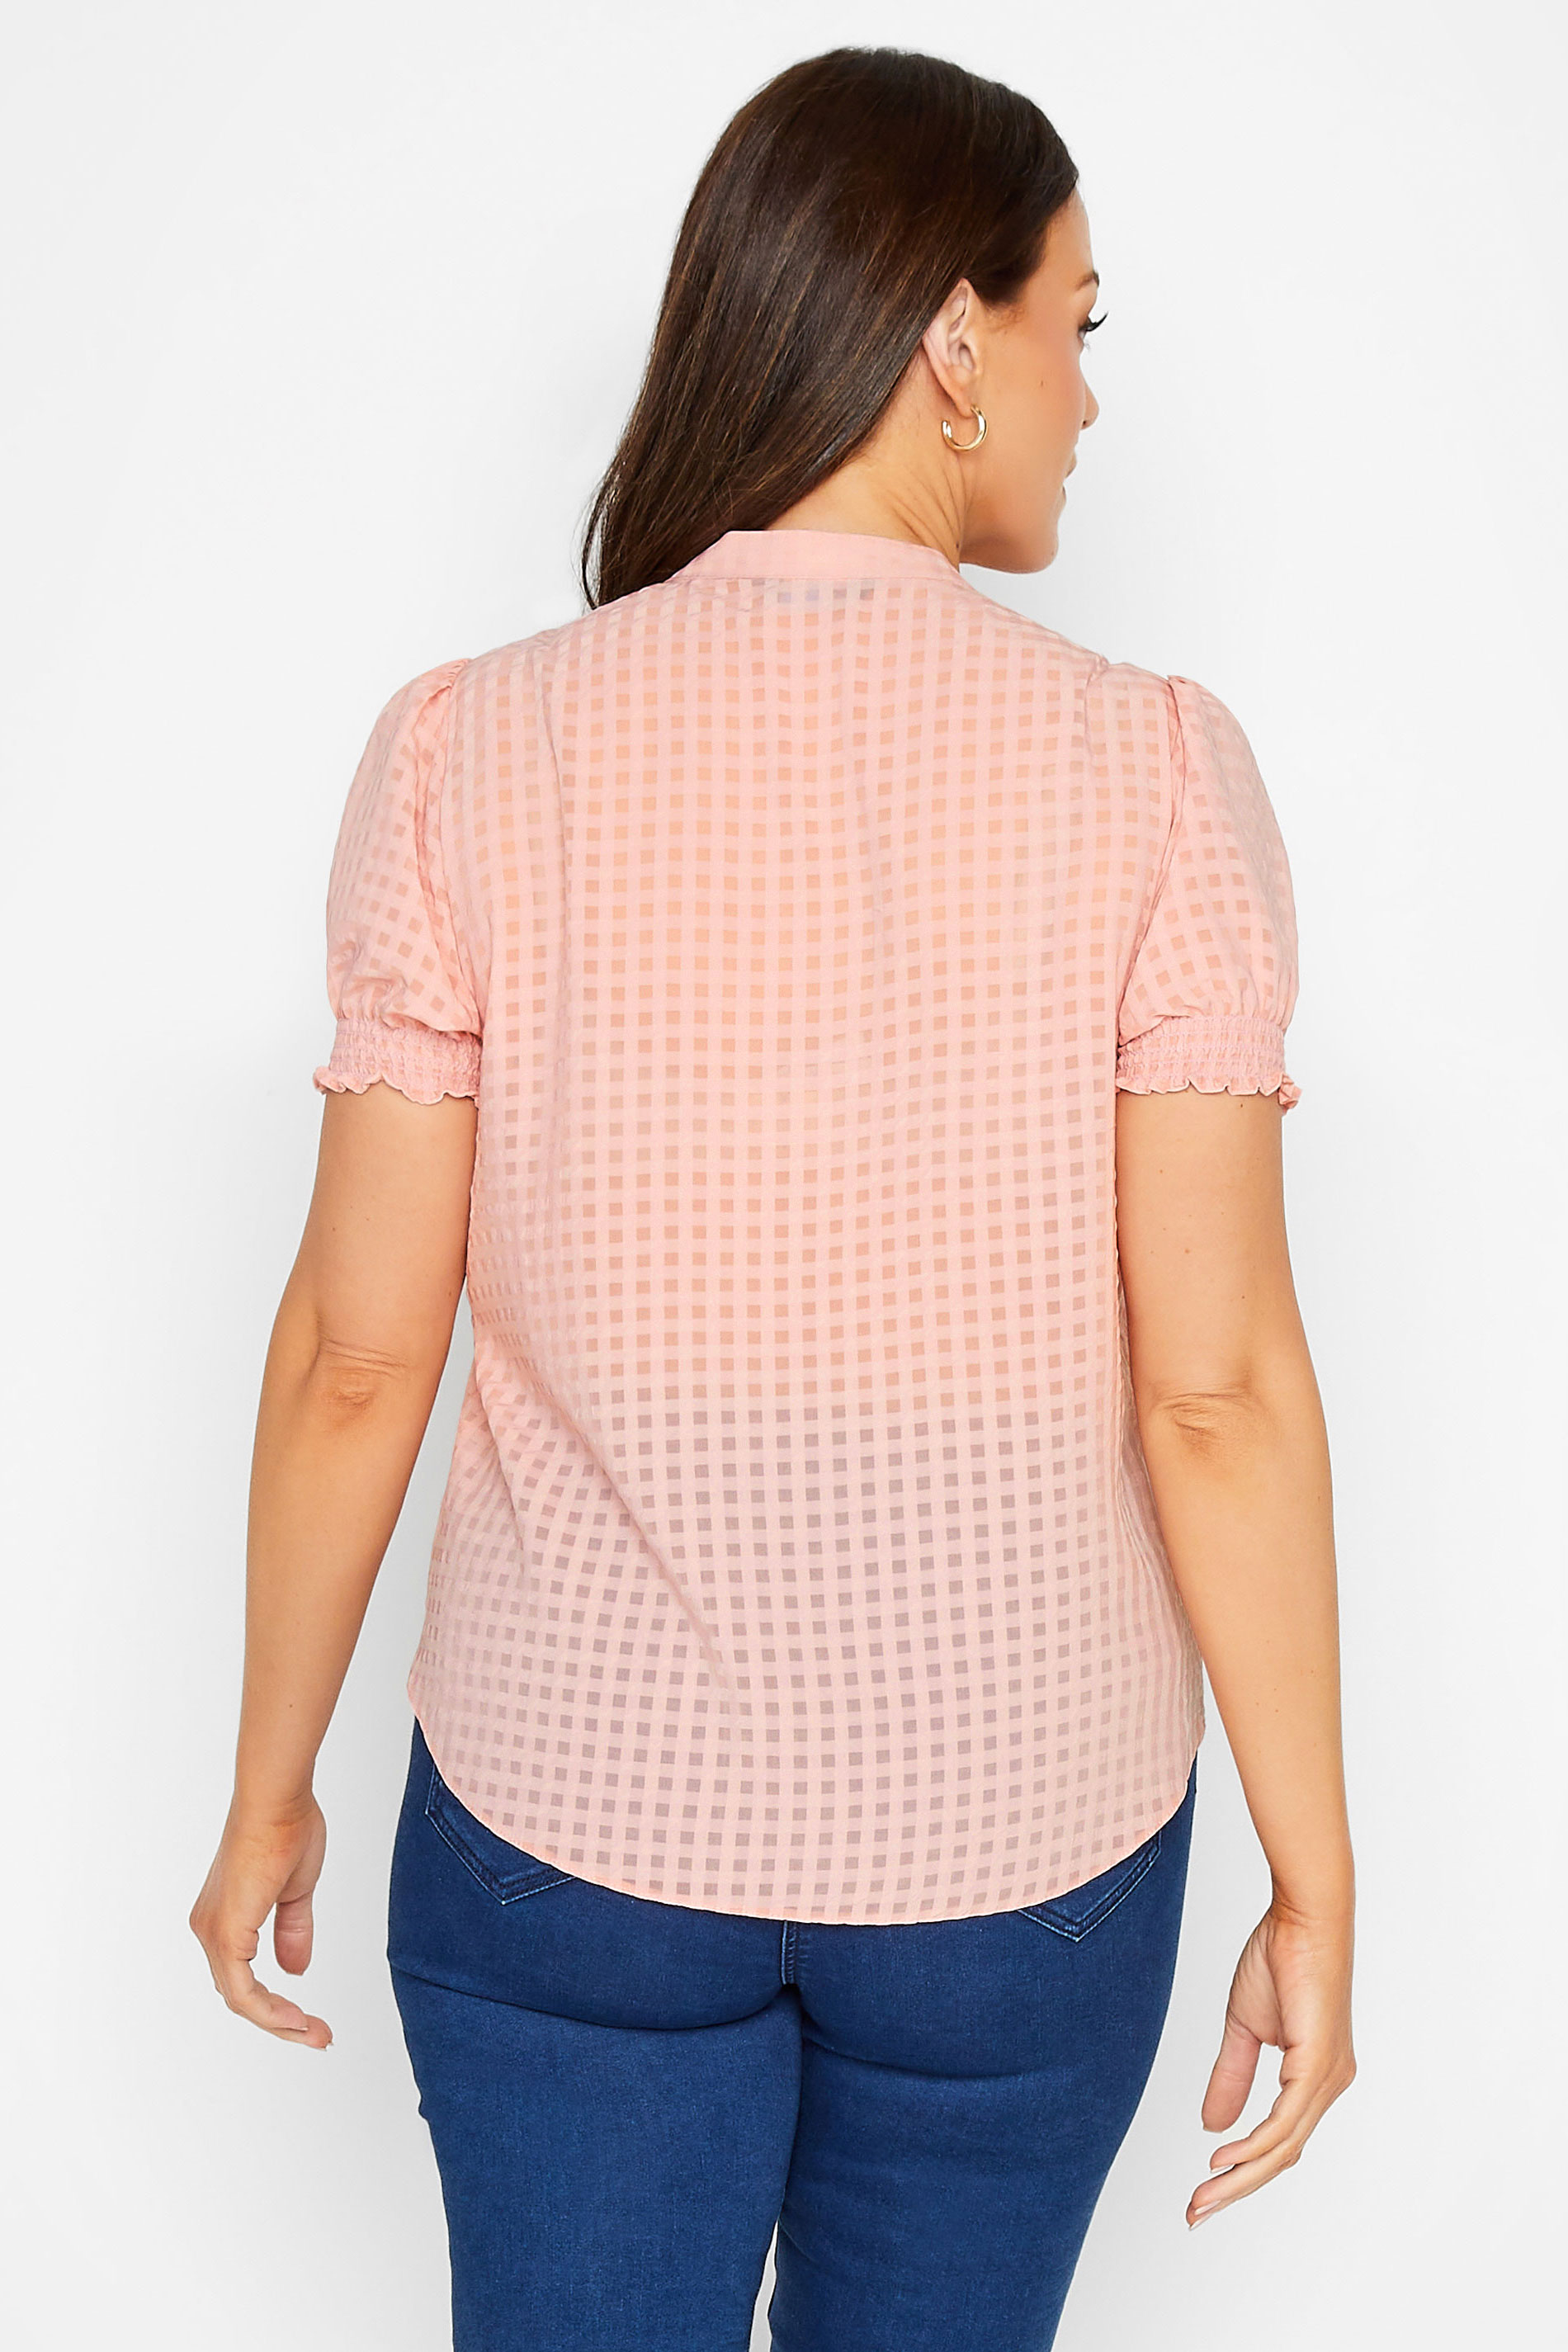 M&Co Pink Gingham Frill Front Blouse 3